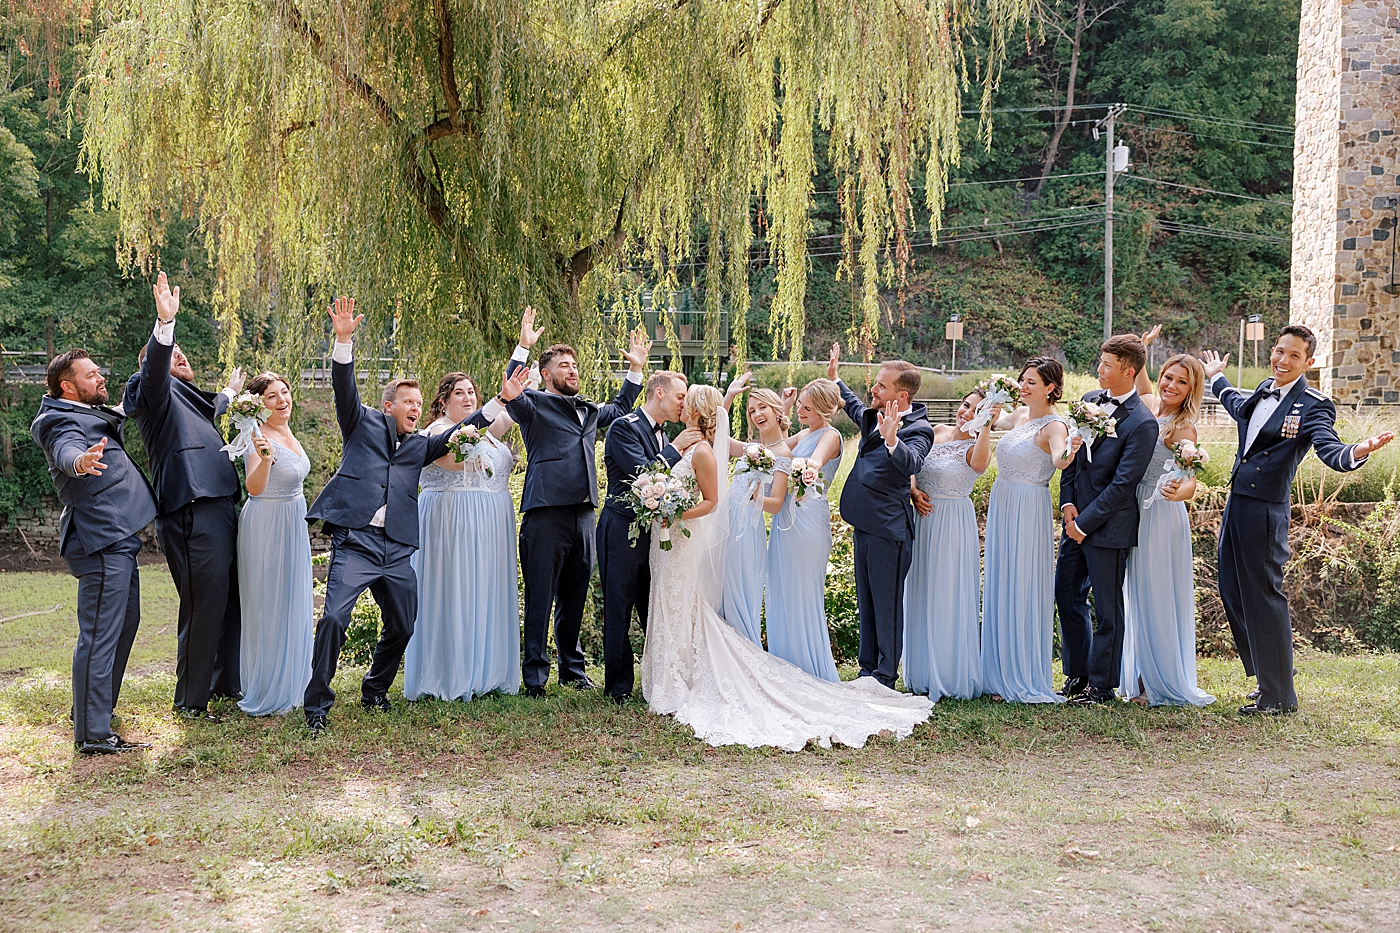 Bride and groom with their wedding party | Image by Hope Helmuth Photography